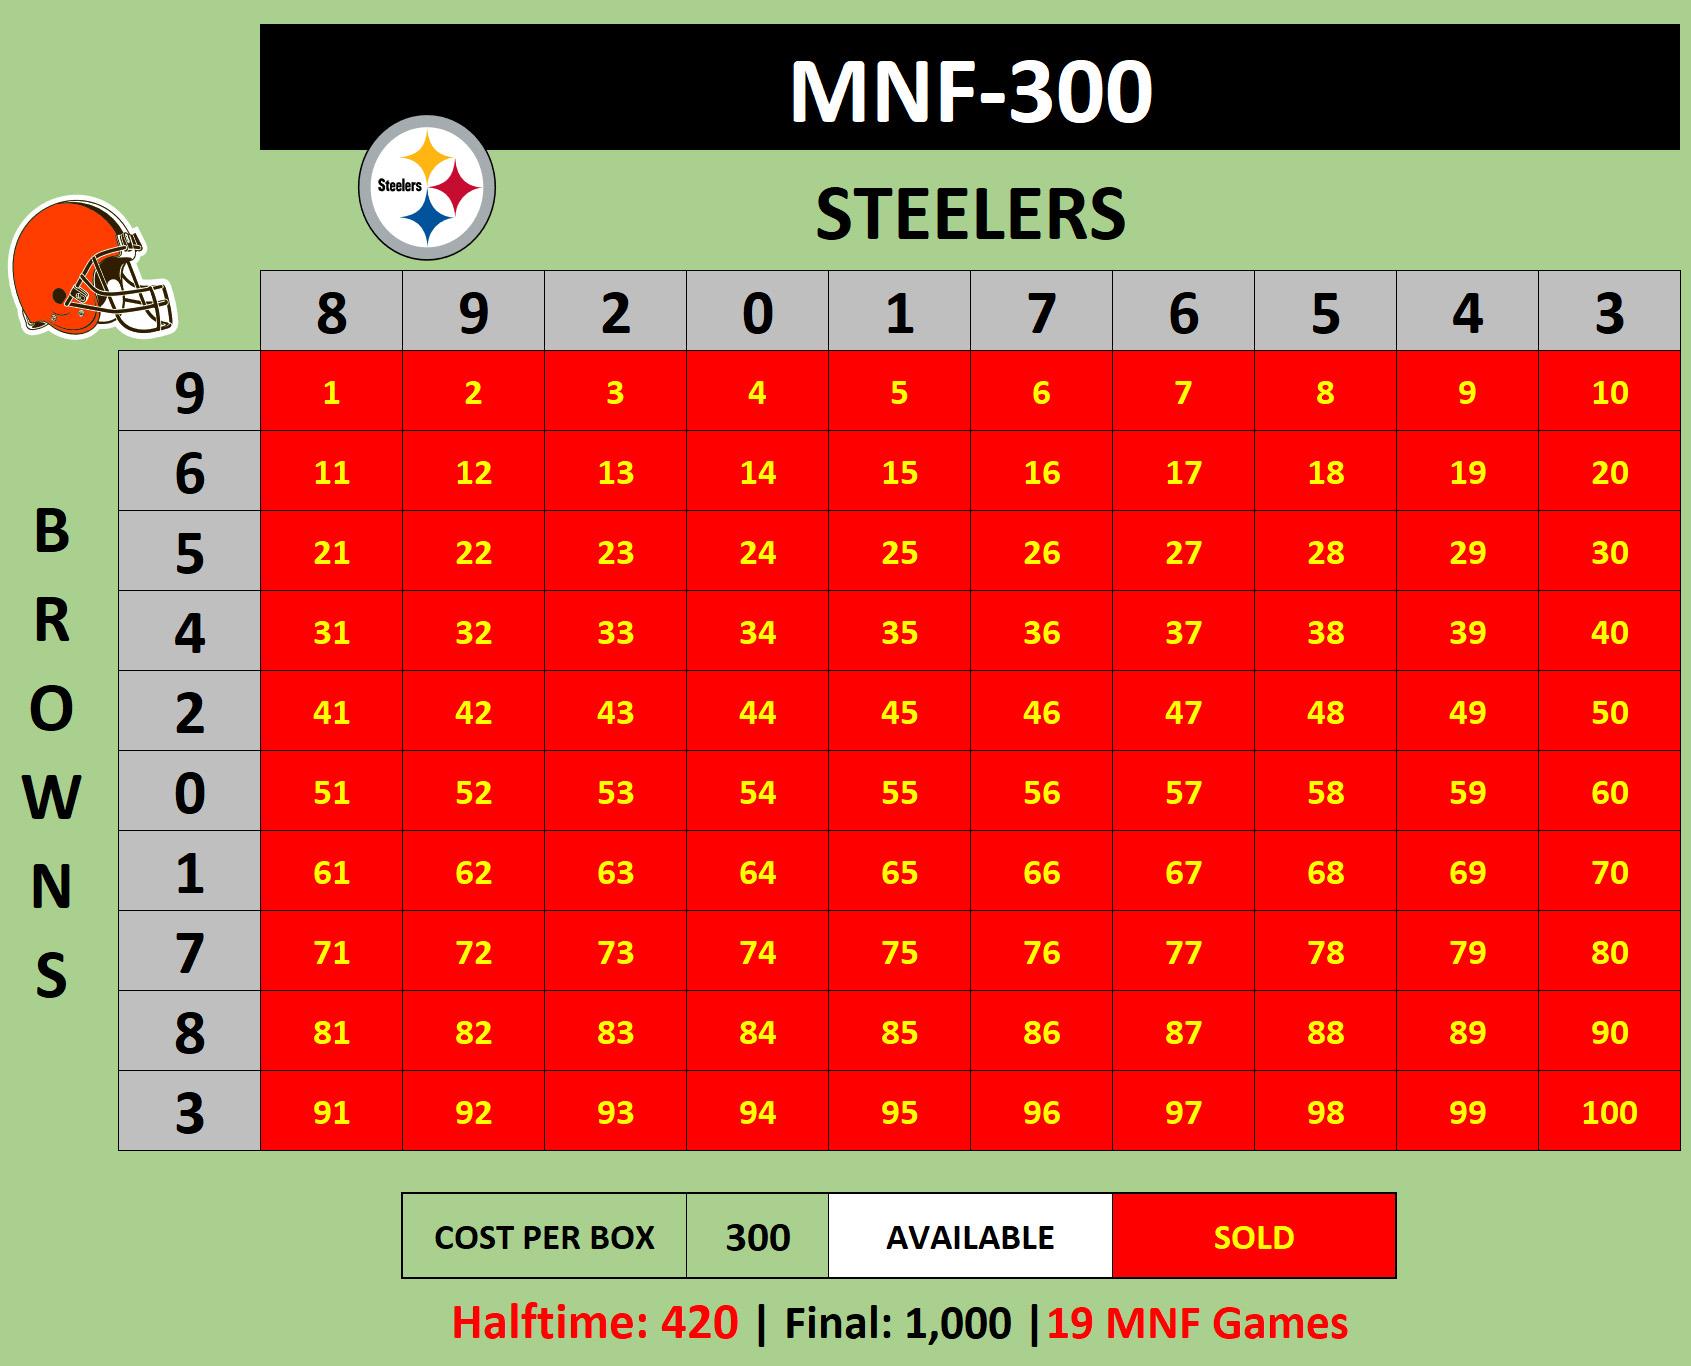 MNF-300 Browns at Steelers